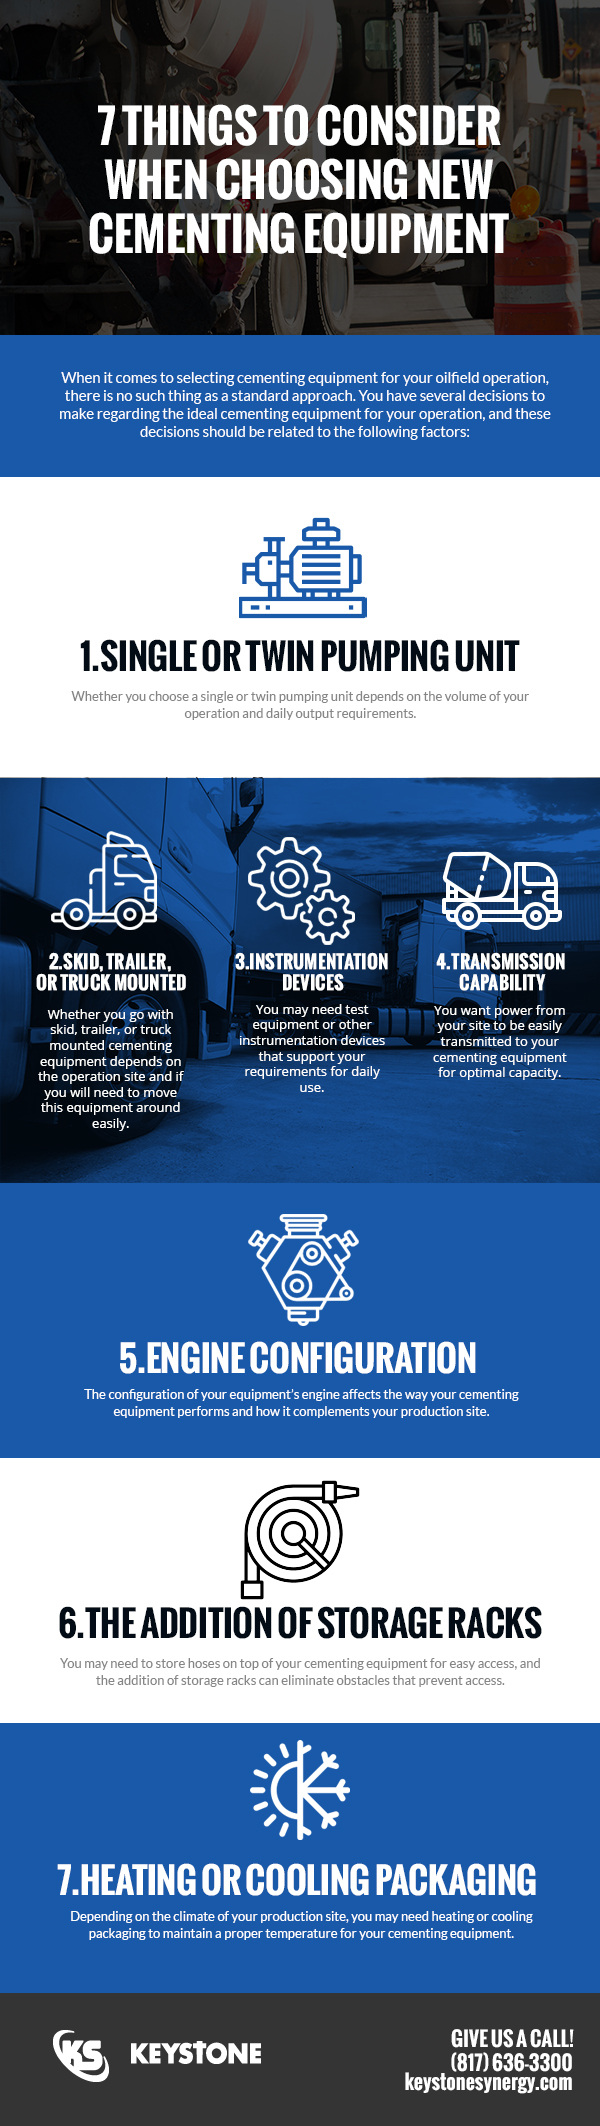 7 Things to Consider When Choosing New Cementing Equipment [Infographic]